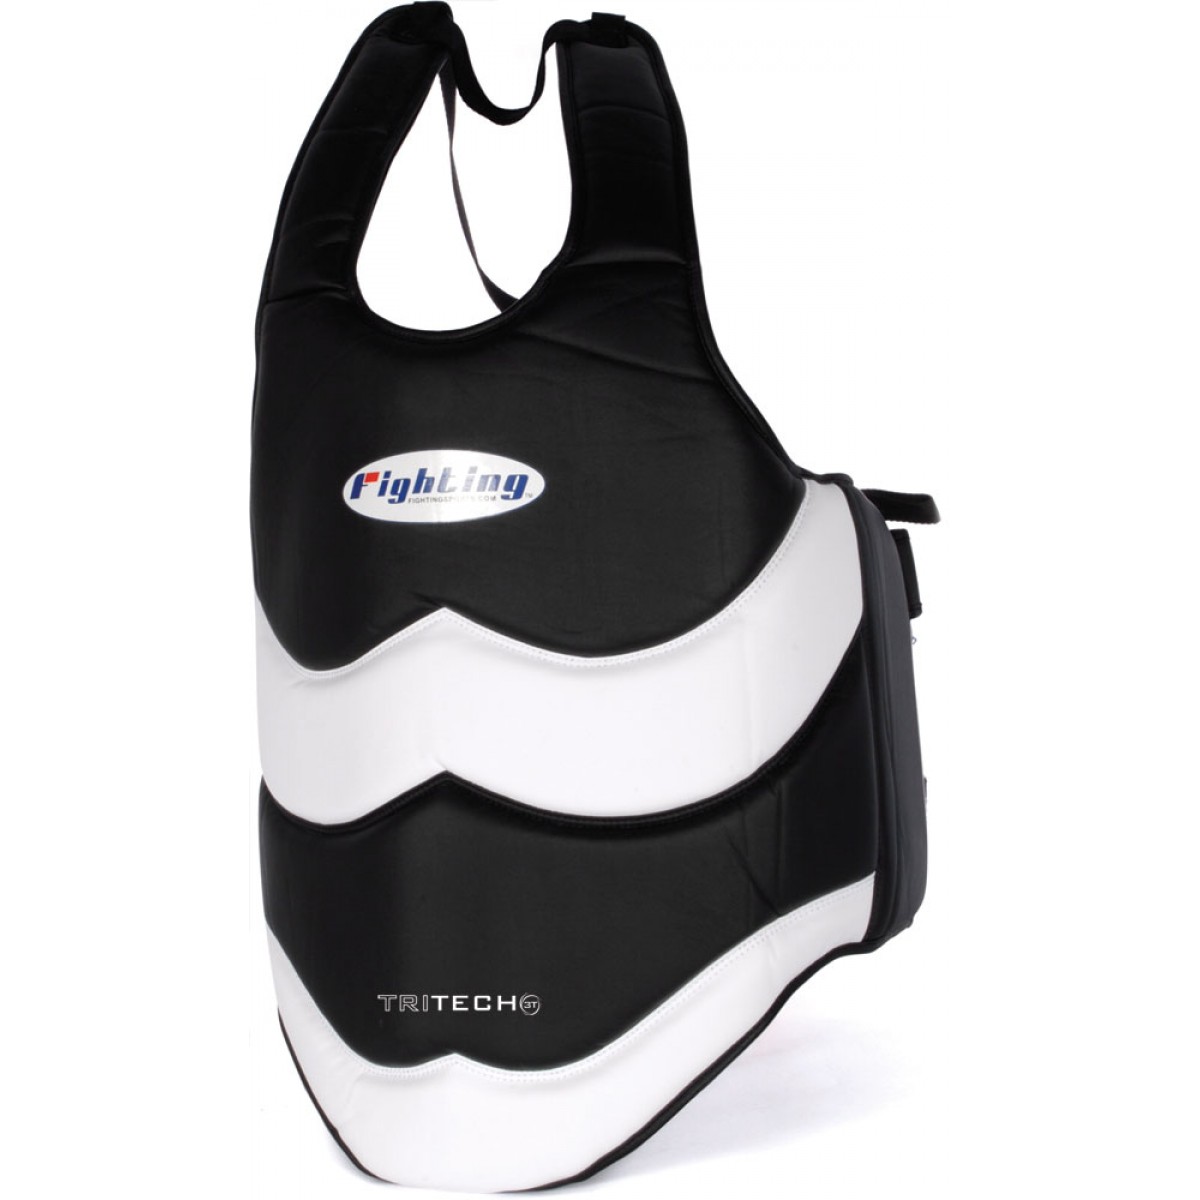 Fighting Sports Tri-Tech Body Protector